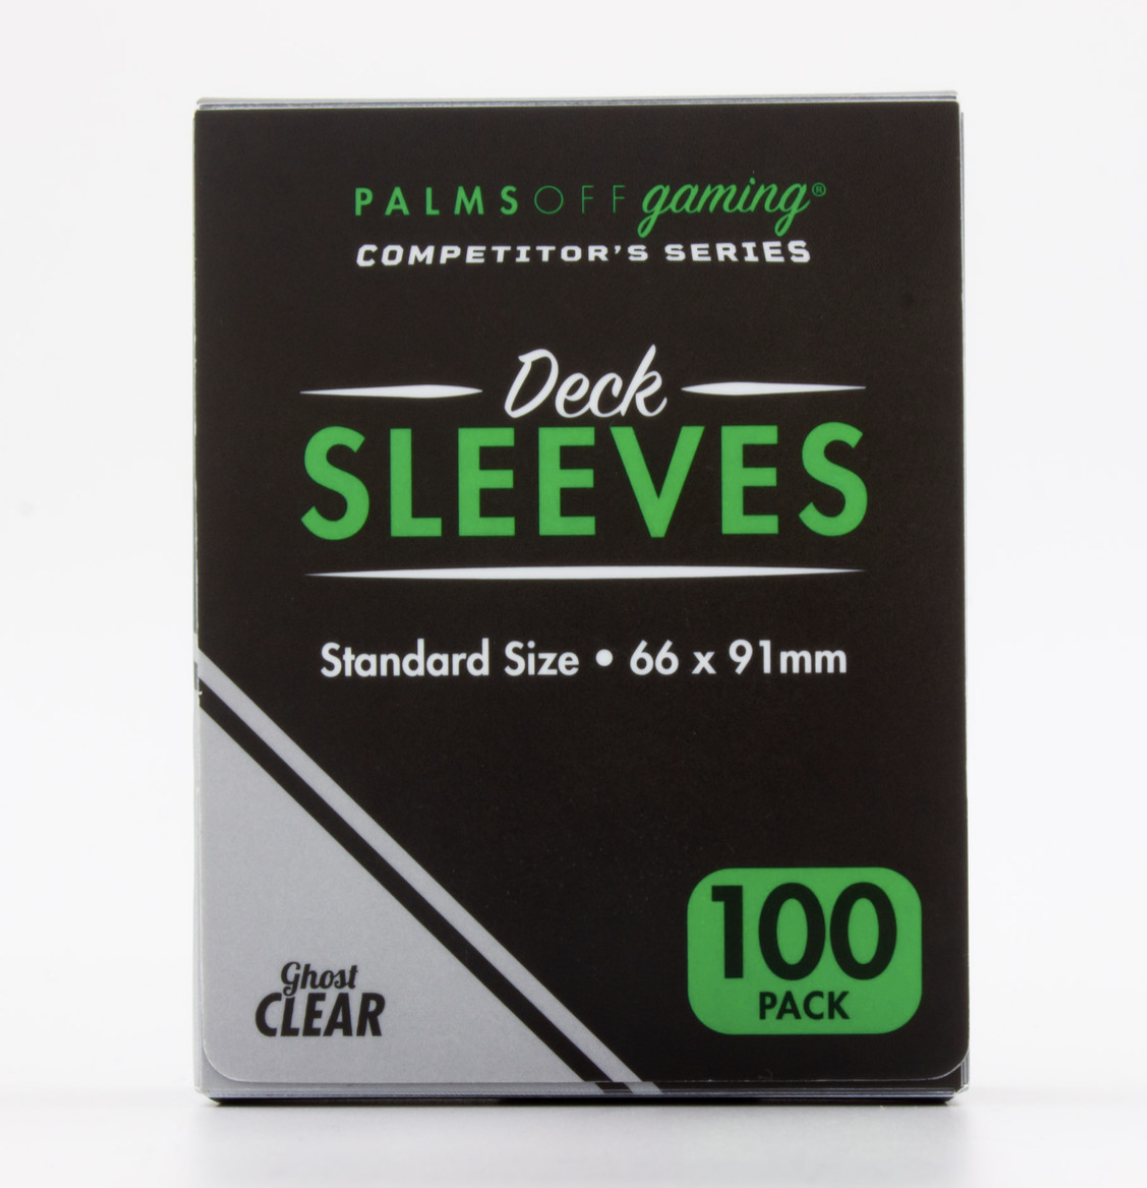 Palms Off Ghost Clear - Competitor's Series Deck Sleeves 100pc